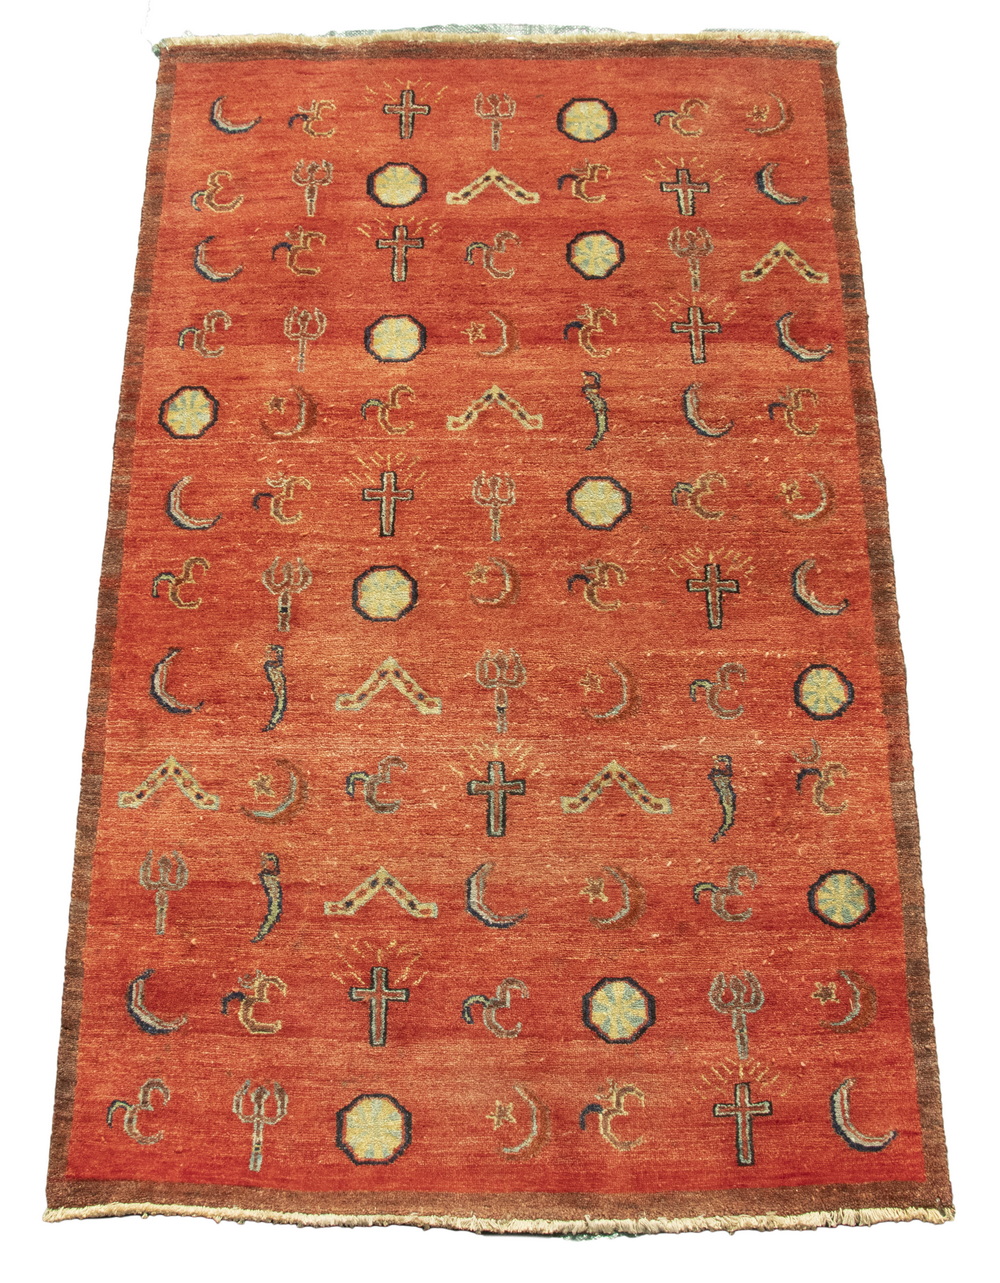 INDIA MADE PEACE RUG A rust-red field